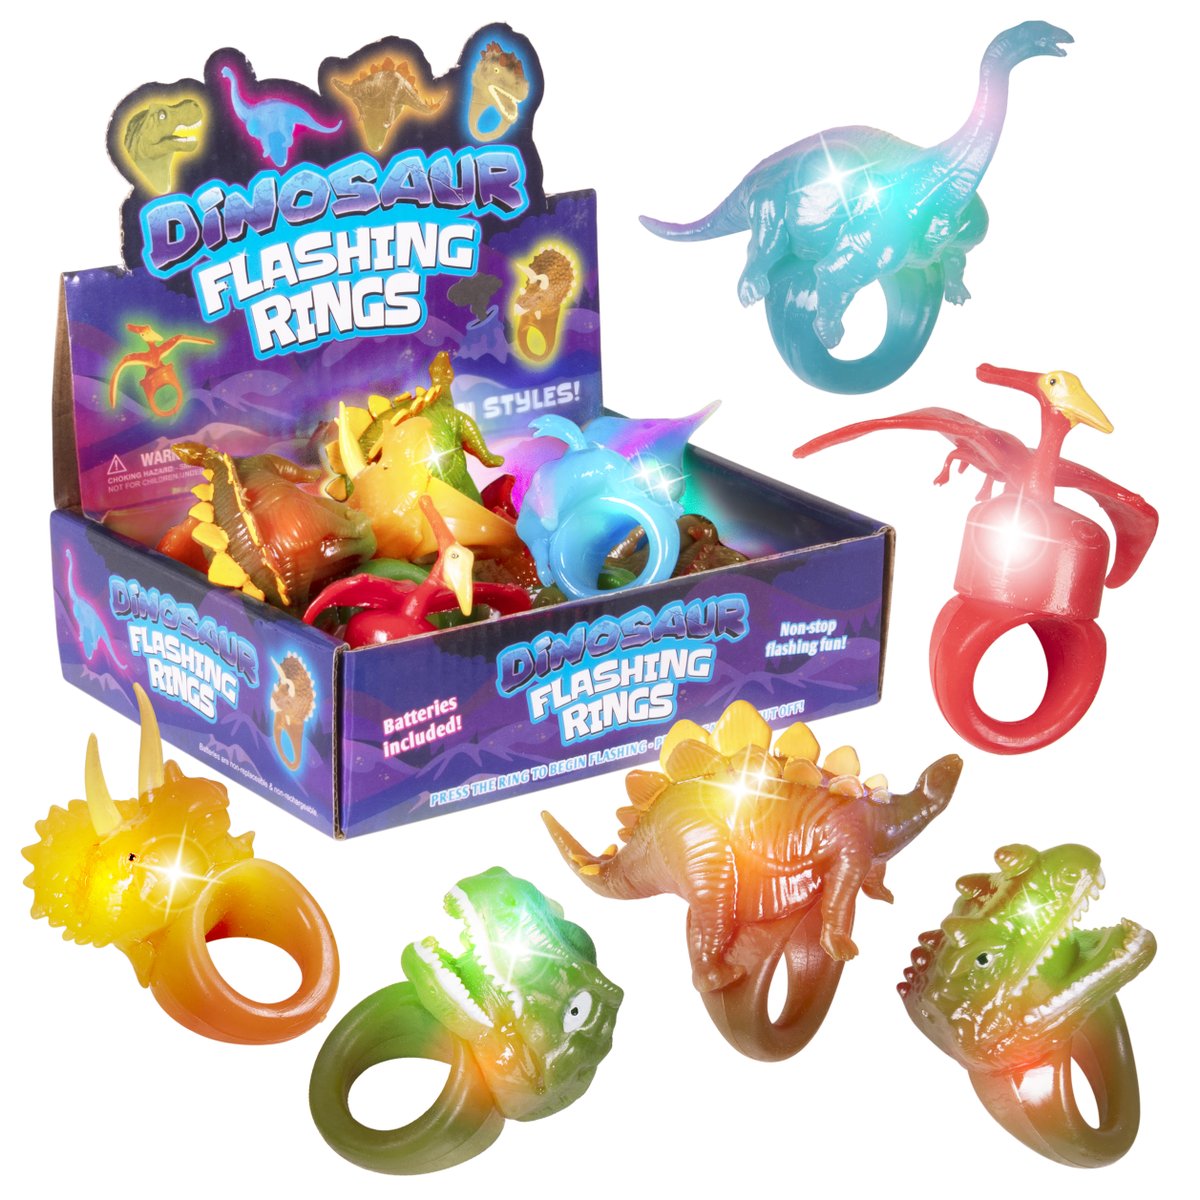 The Dinosaur themed Jelly Flashing Rings I designed came in today. I really enjoy creating and bringing an original product idea to the market from concept to a finished product. #design #graphicdesign #productdevelopemnt #Flashyrings #Dinosaur #kids #Dino #packaging #rings #toys